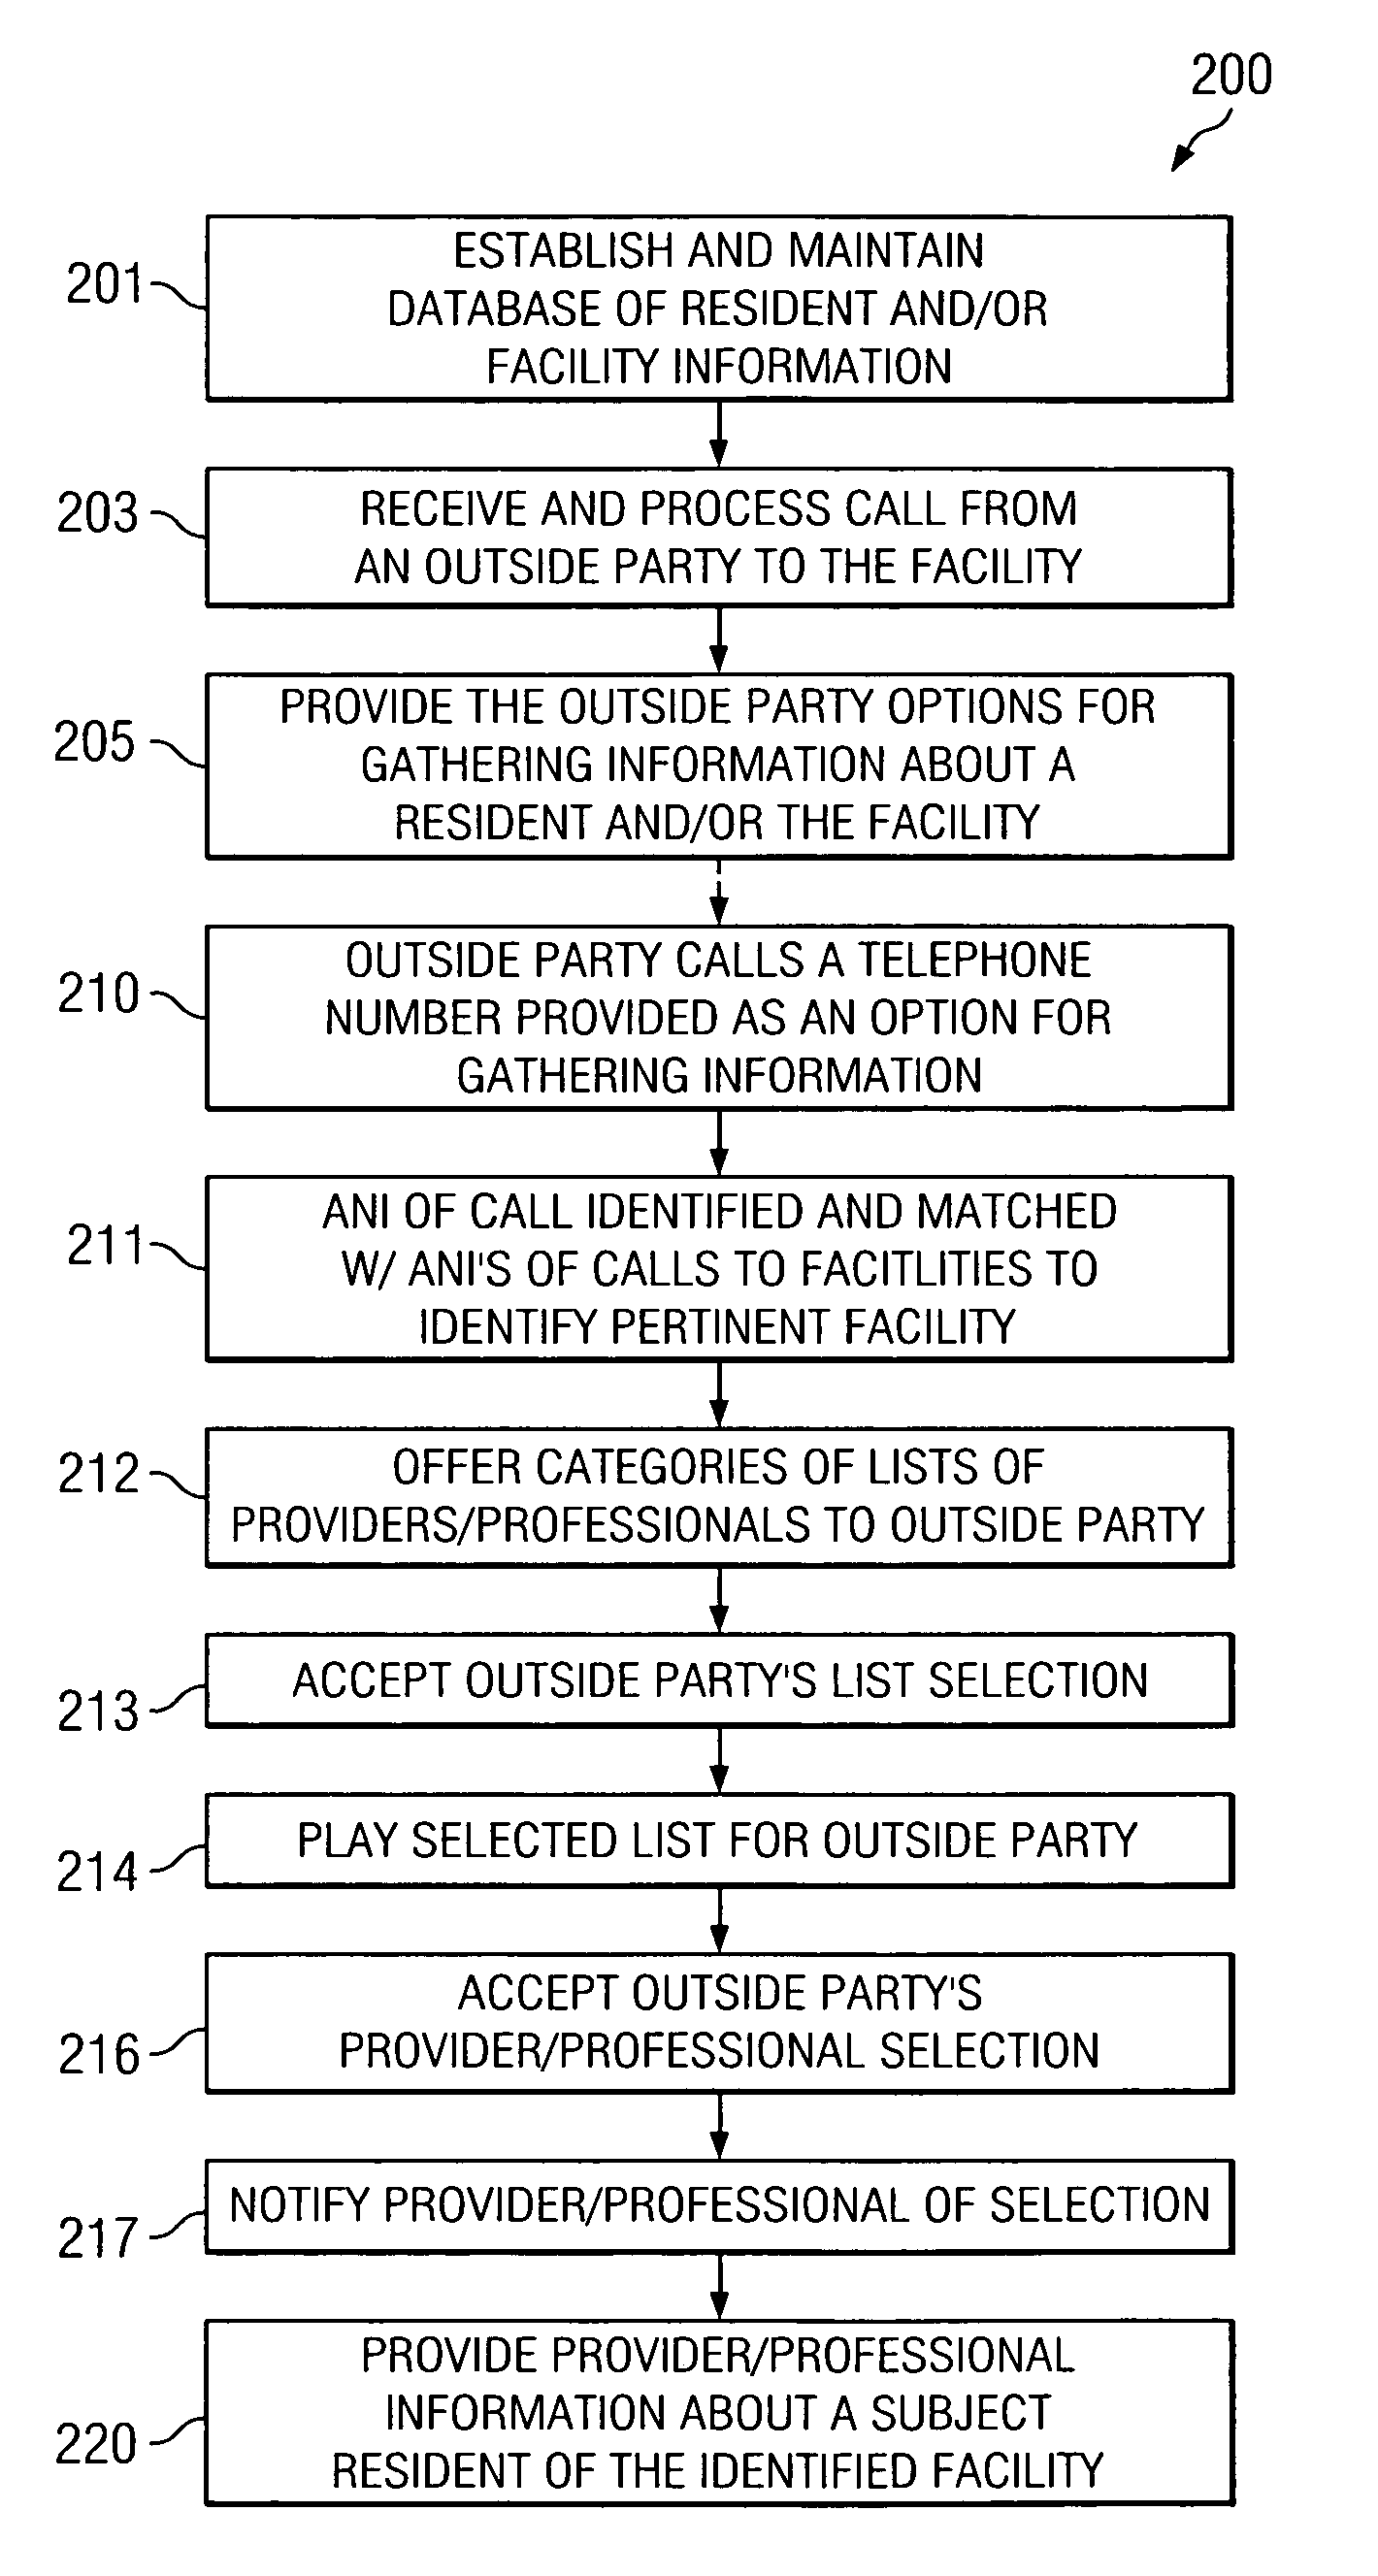 Systems and methods for management and dissemination of information from a controlled environment facility